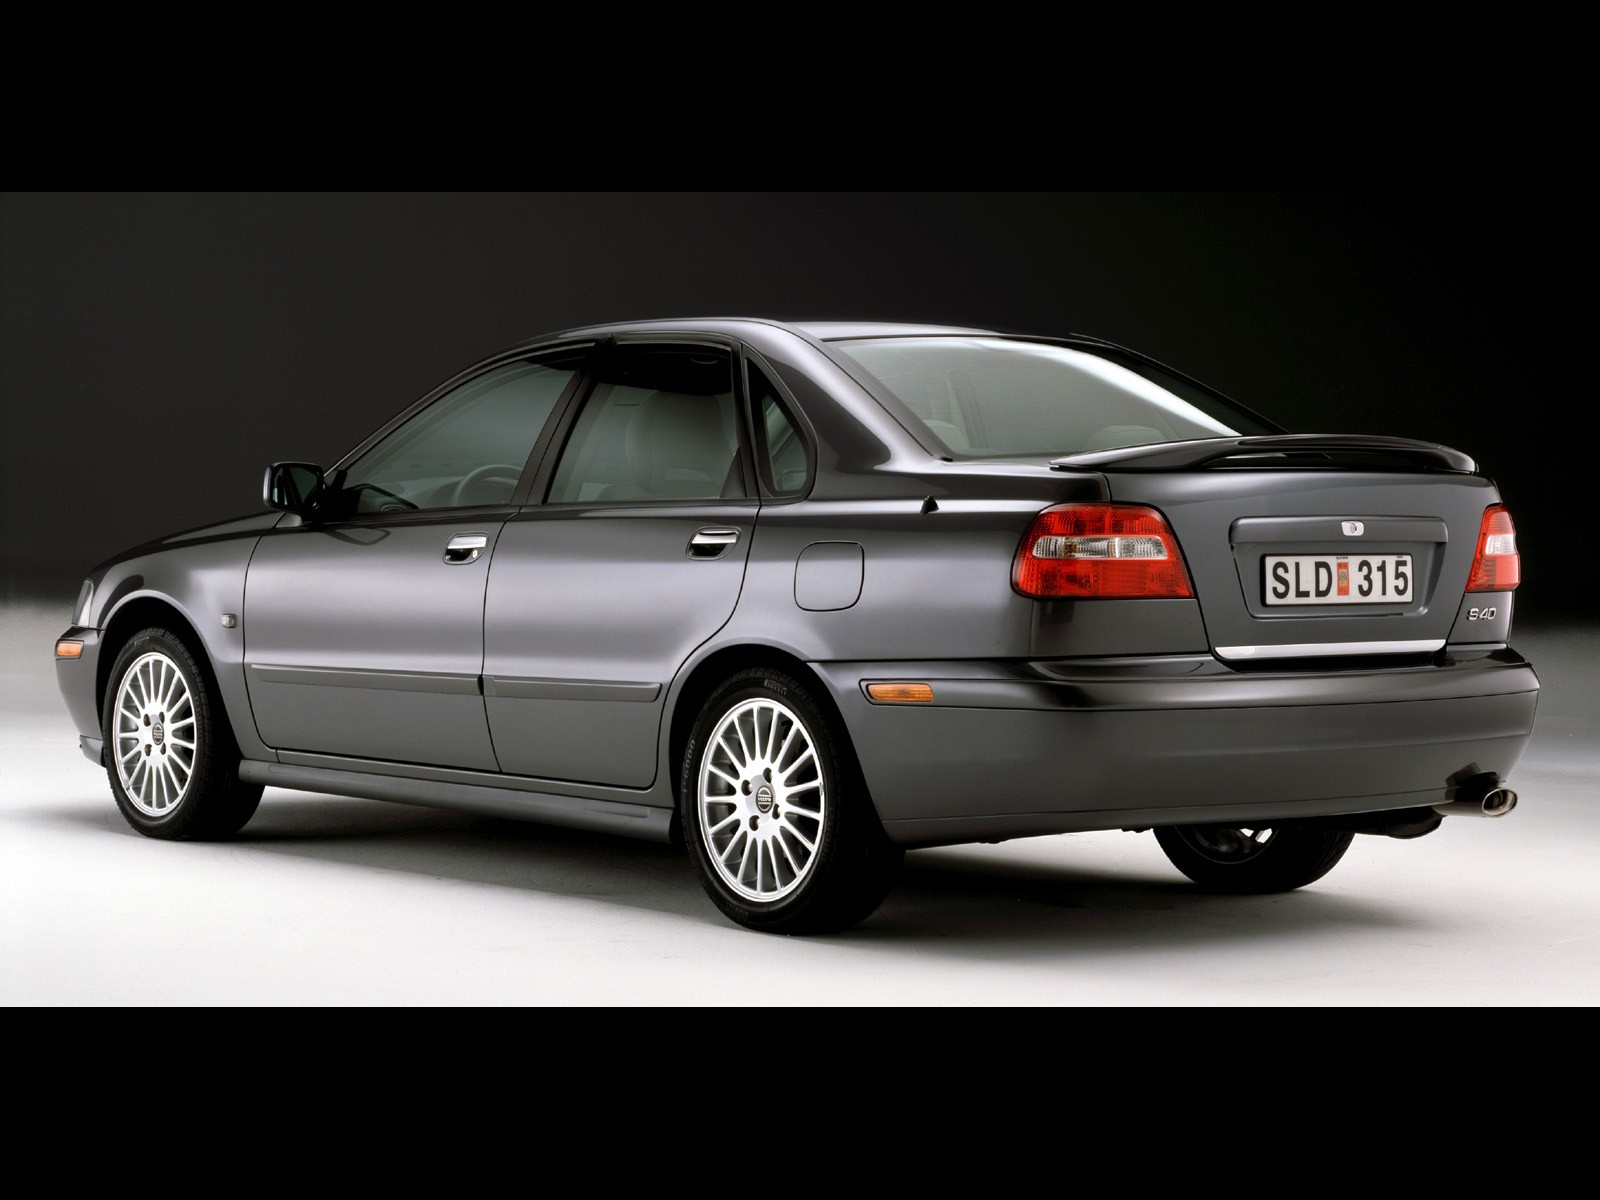 Volvo Passion - All About Volvo: The Volvo S40 (Older Model) 1999-2004